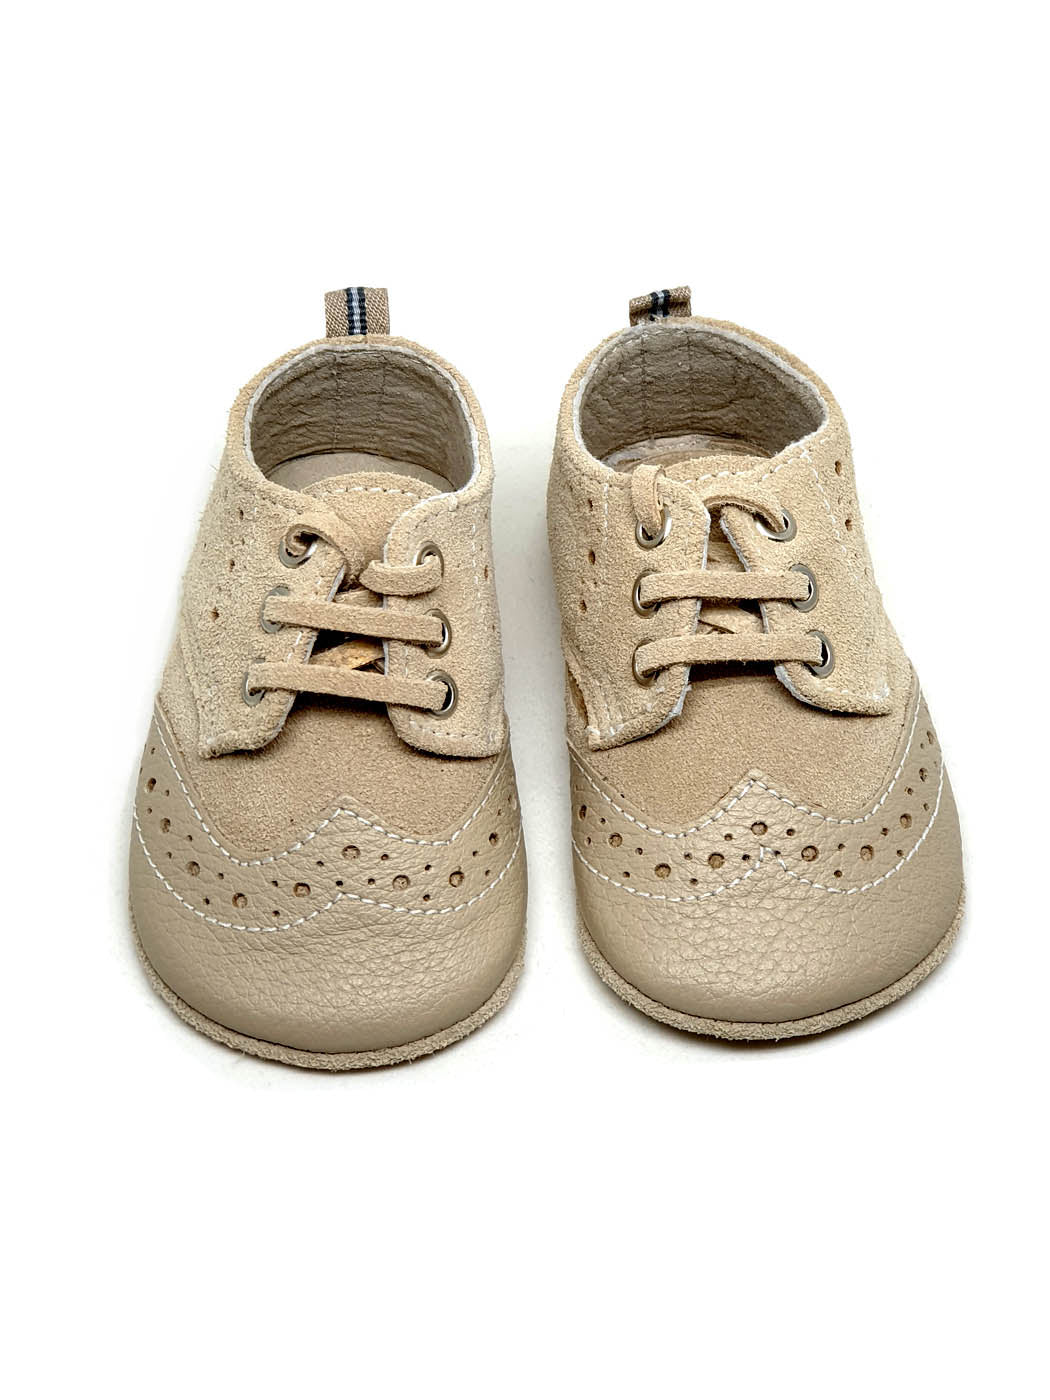 Baby's Leather Shoe for boy - Beige